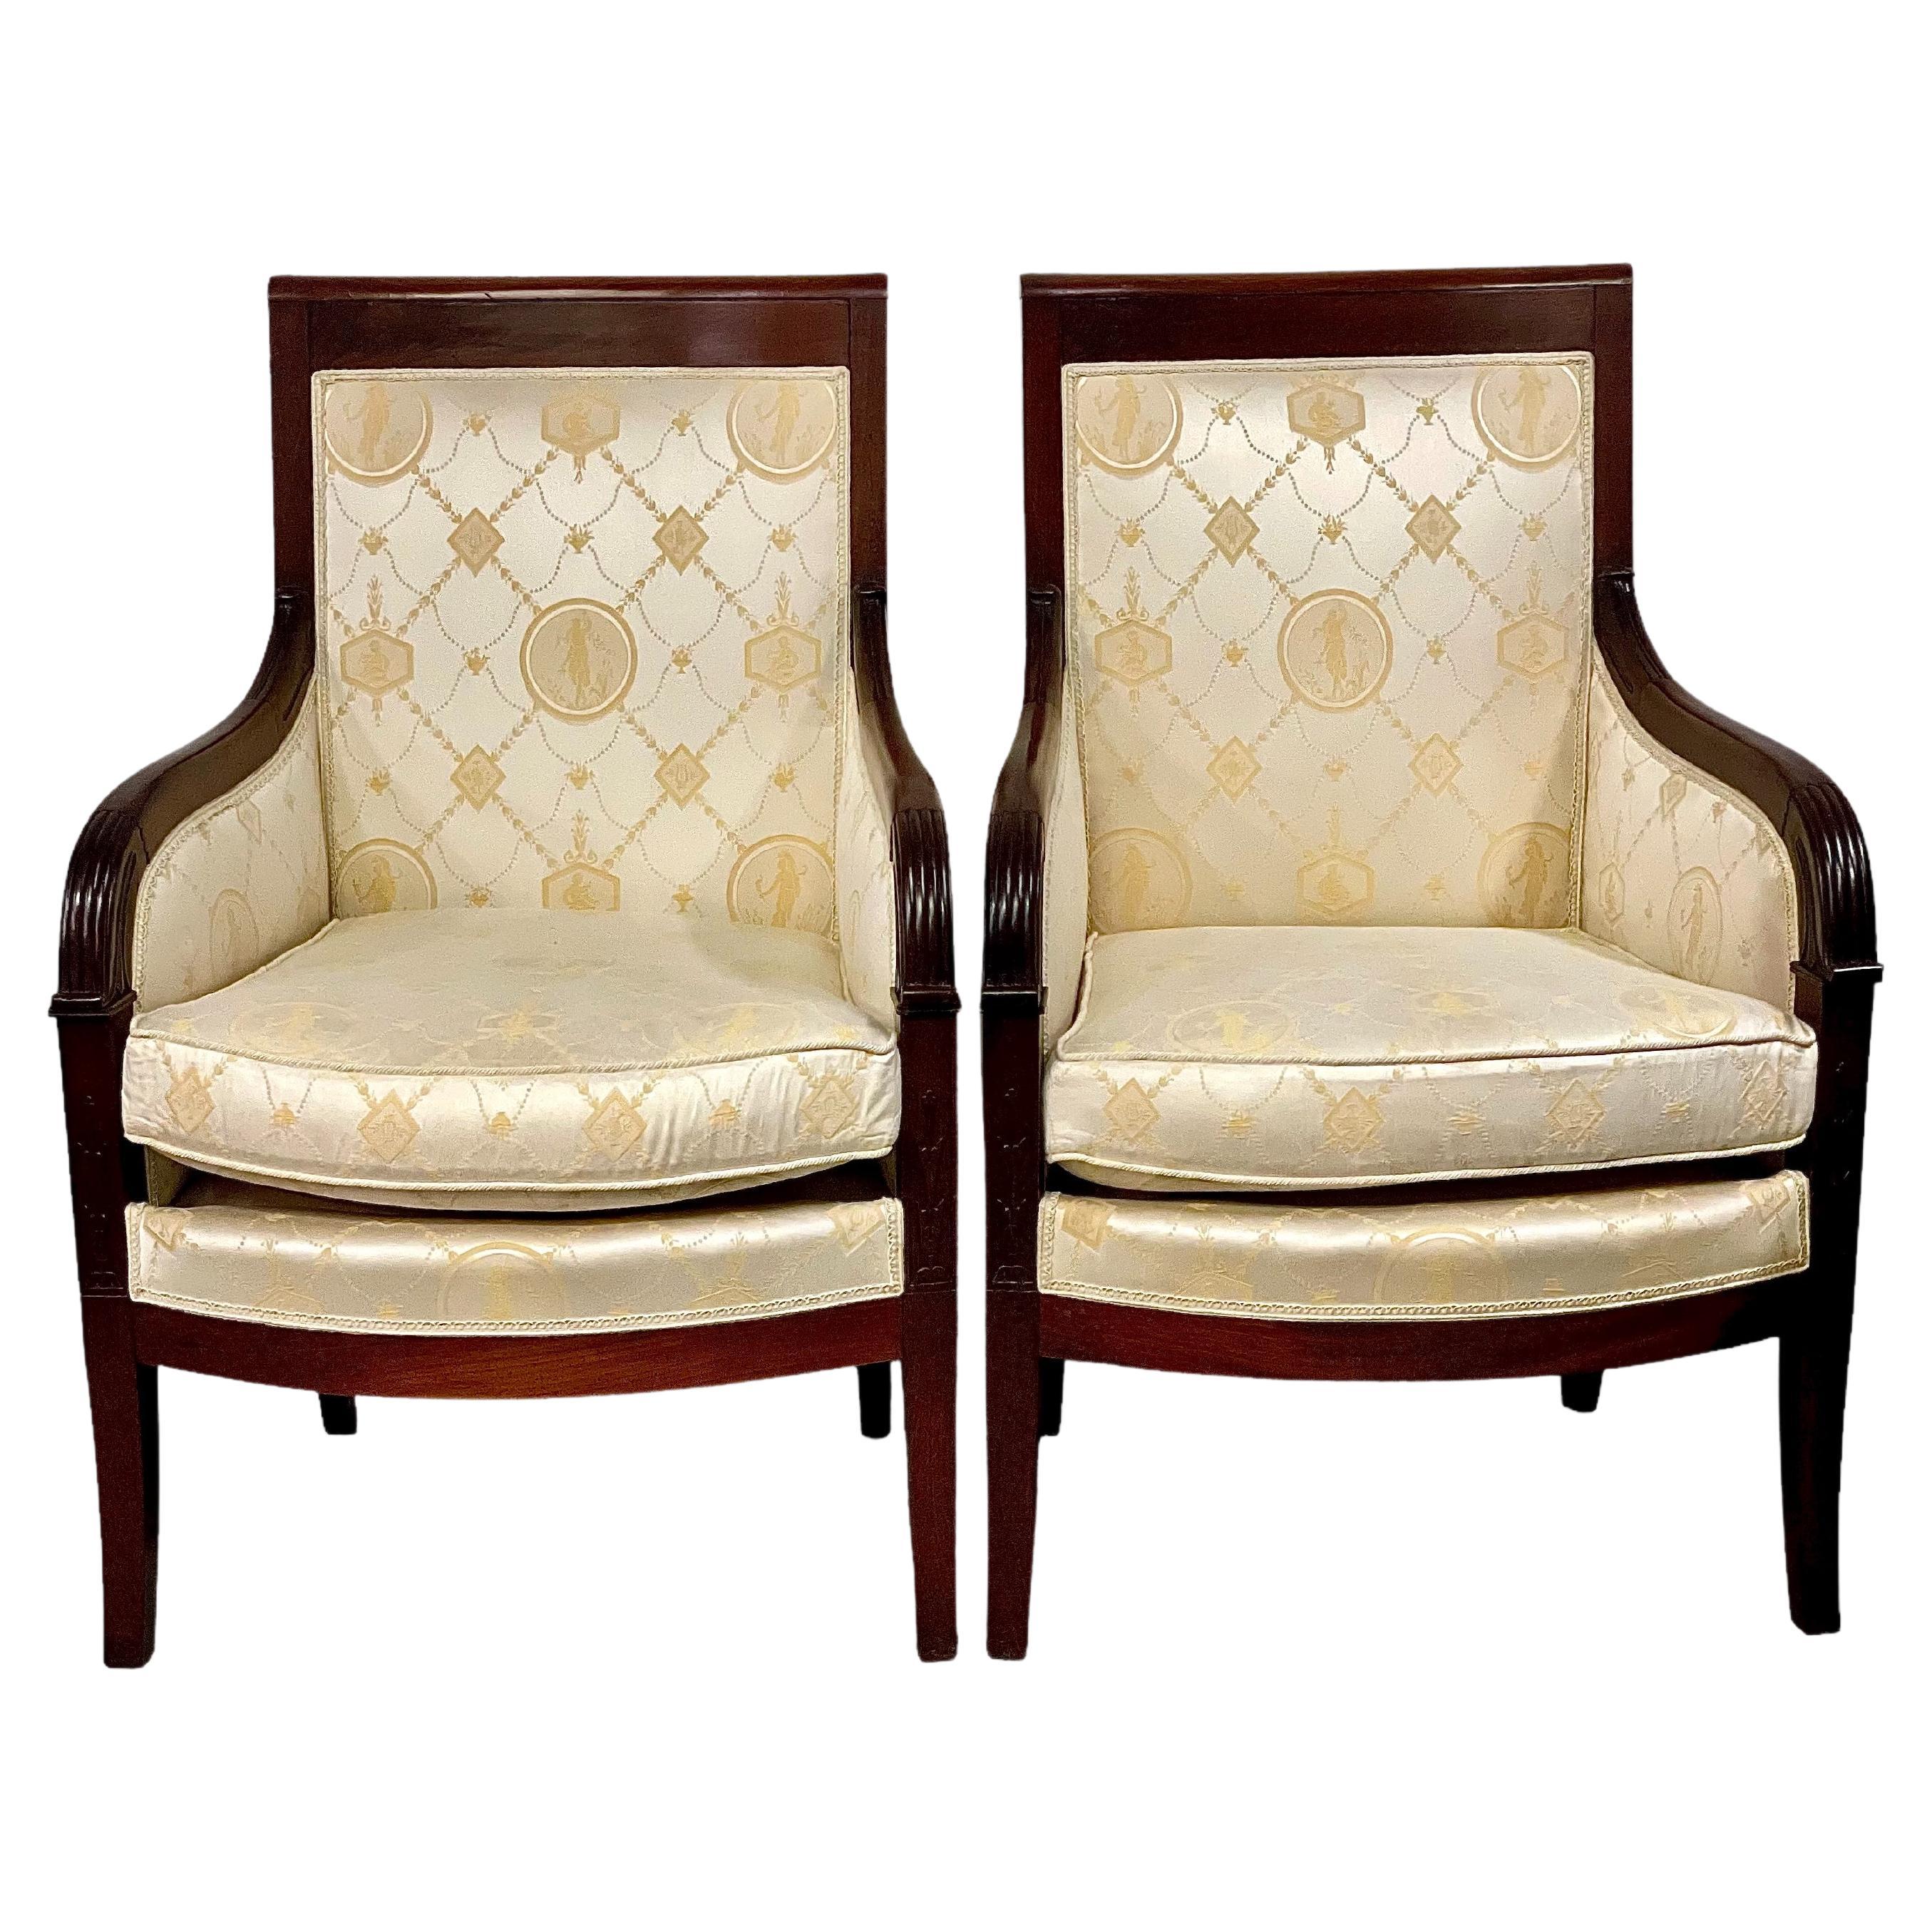 19th Century Pair of French Empire Bergeres Armchairs For Sale